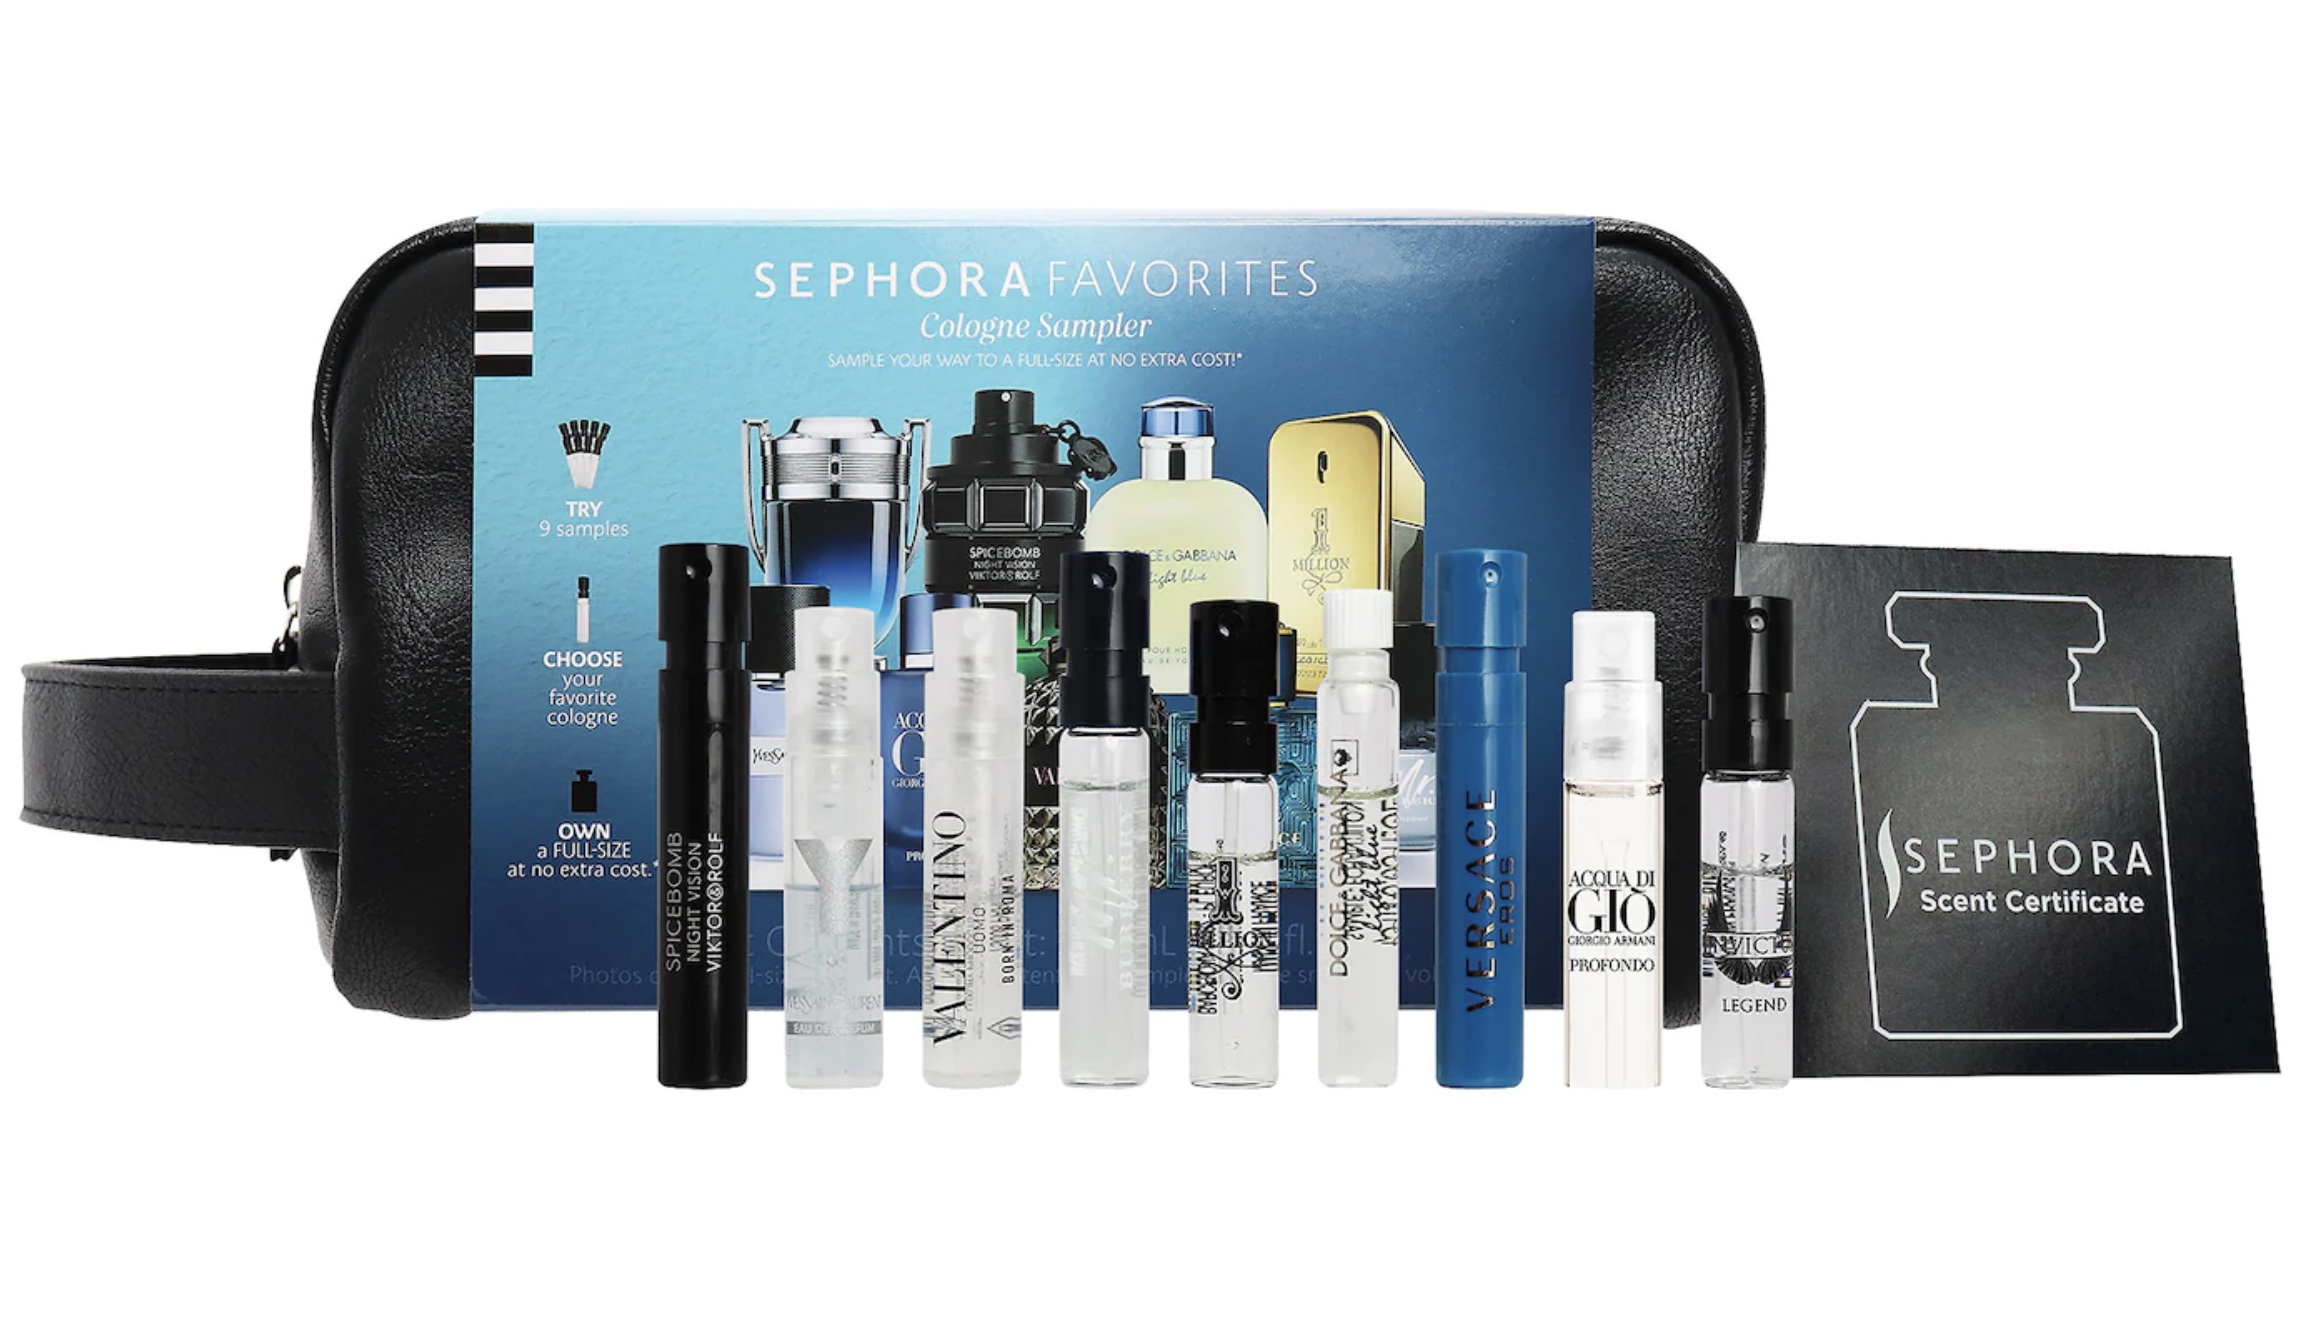 New Sephora Men's Cologne Sampler Kit Available Now + Coupons! - Hello ...